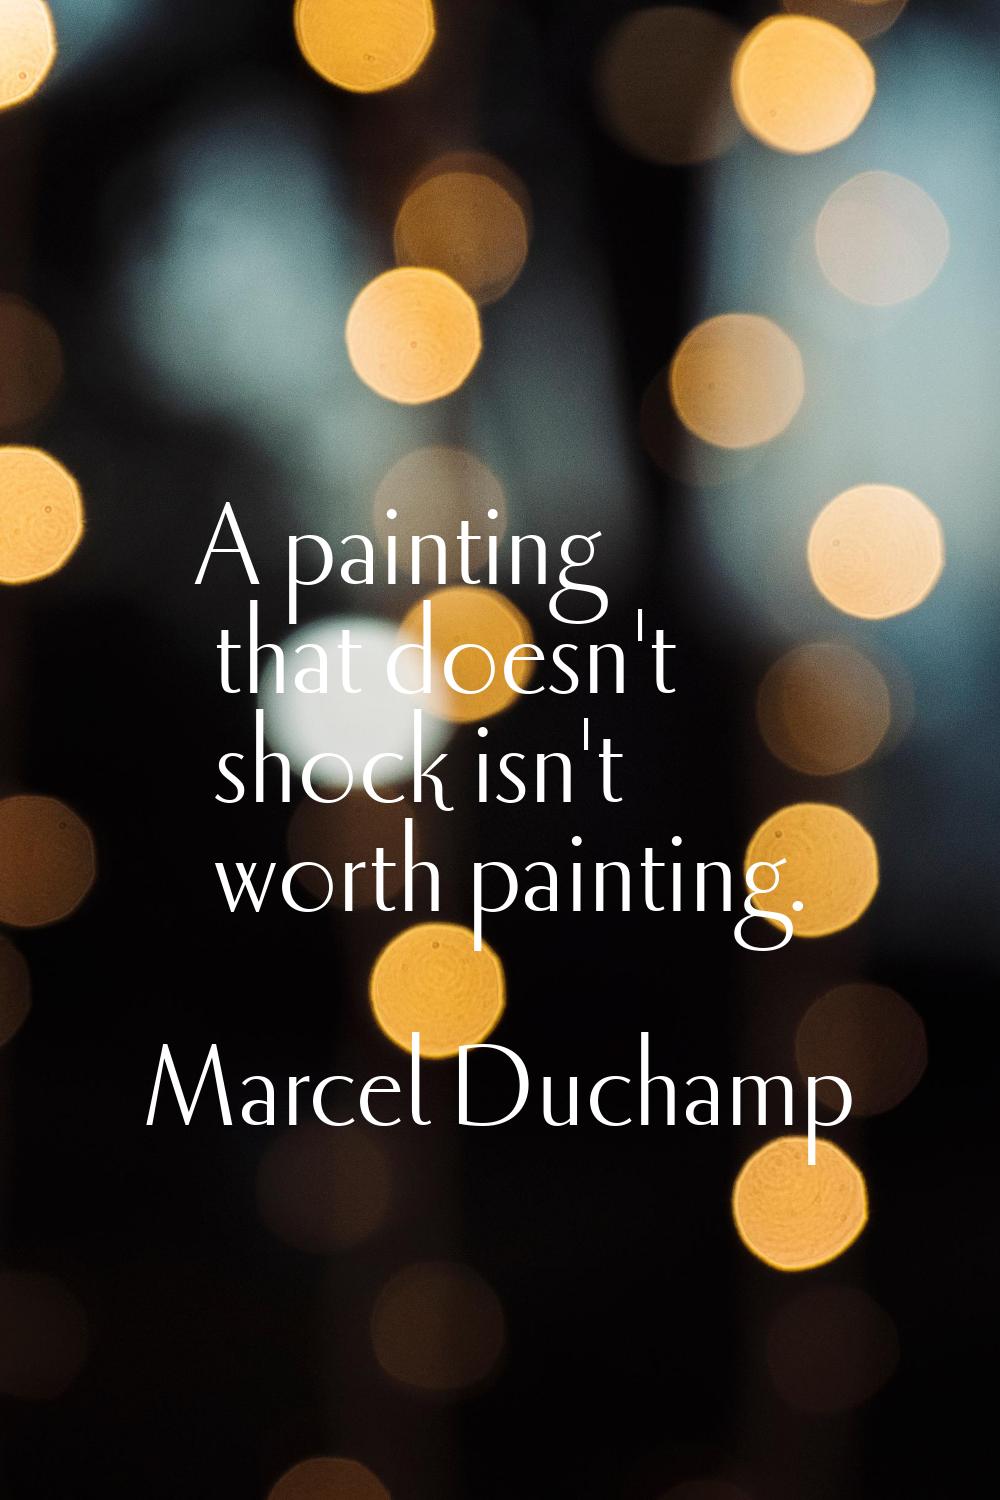 A painting that doesn't shock isn't worth painting.